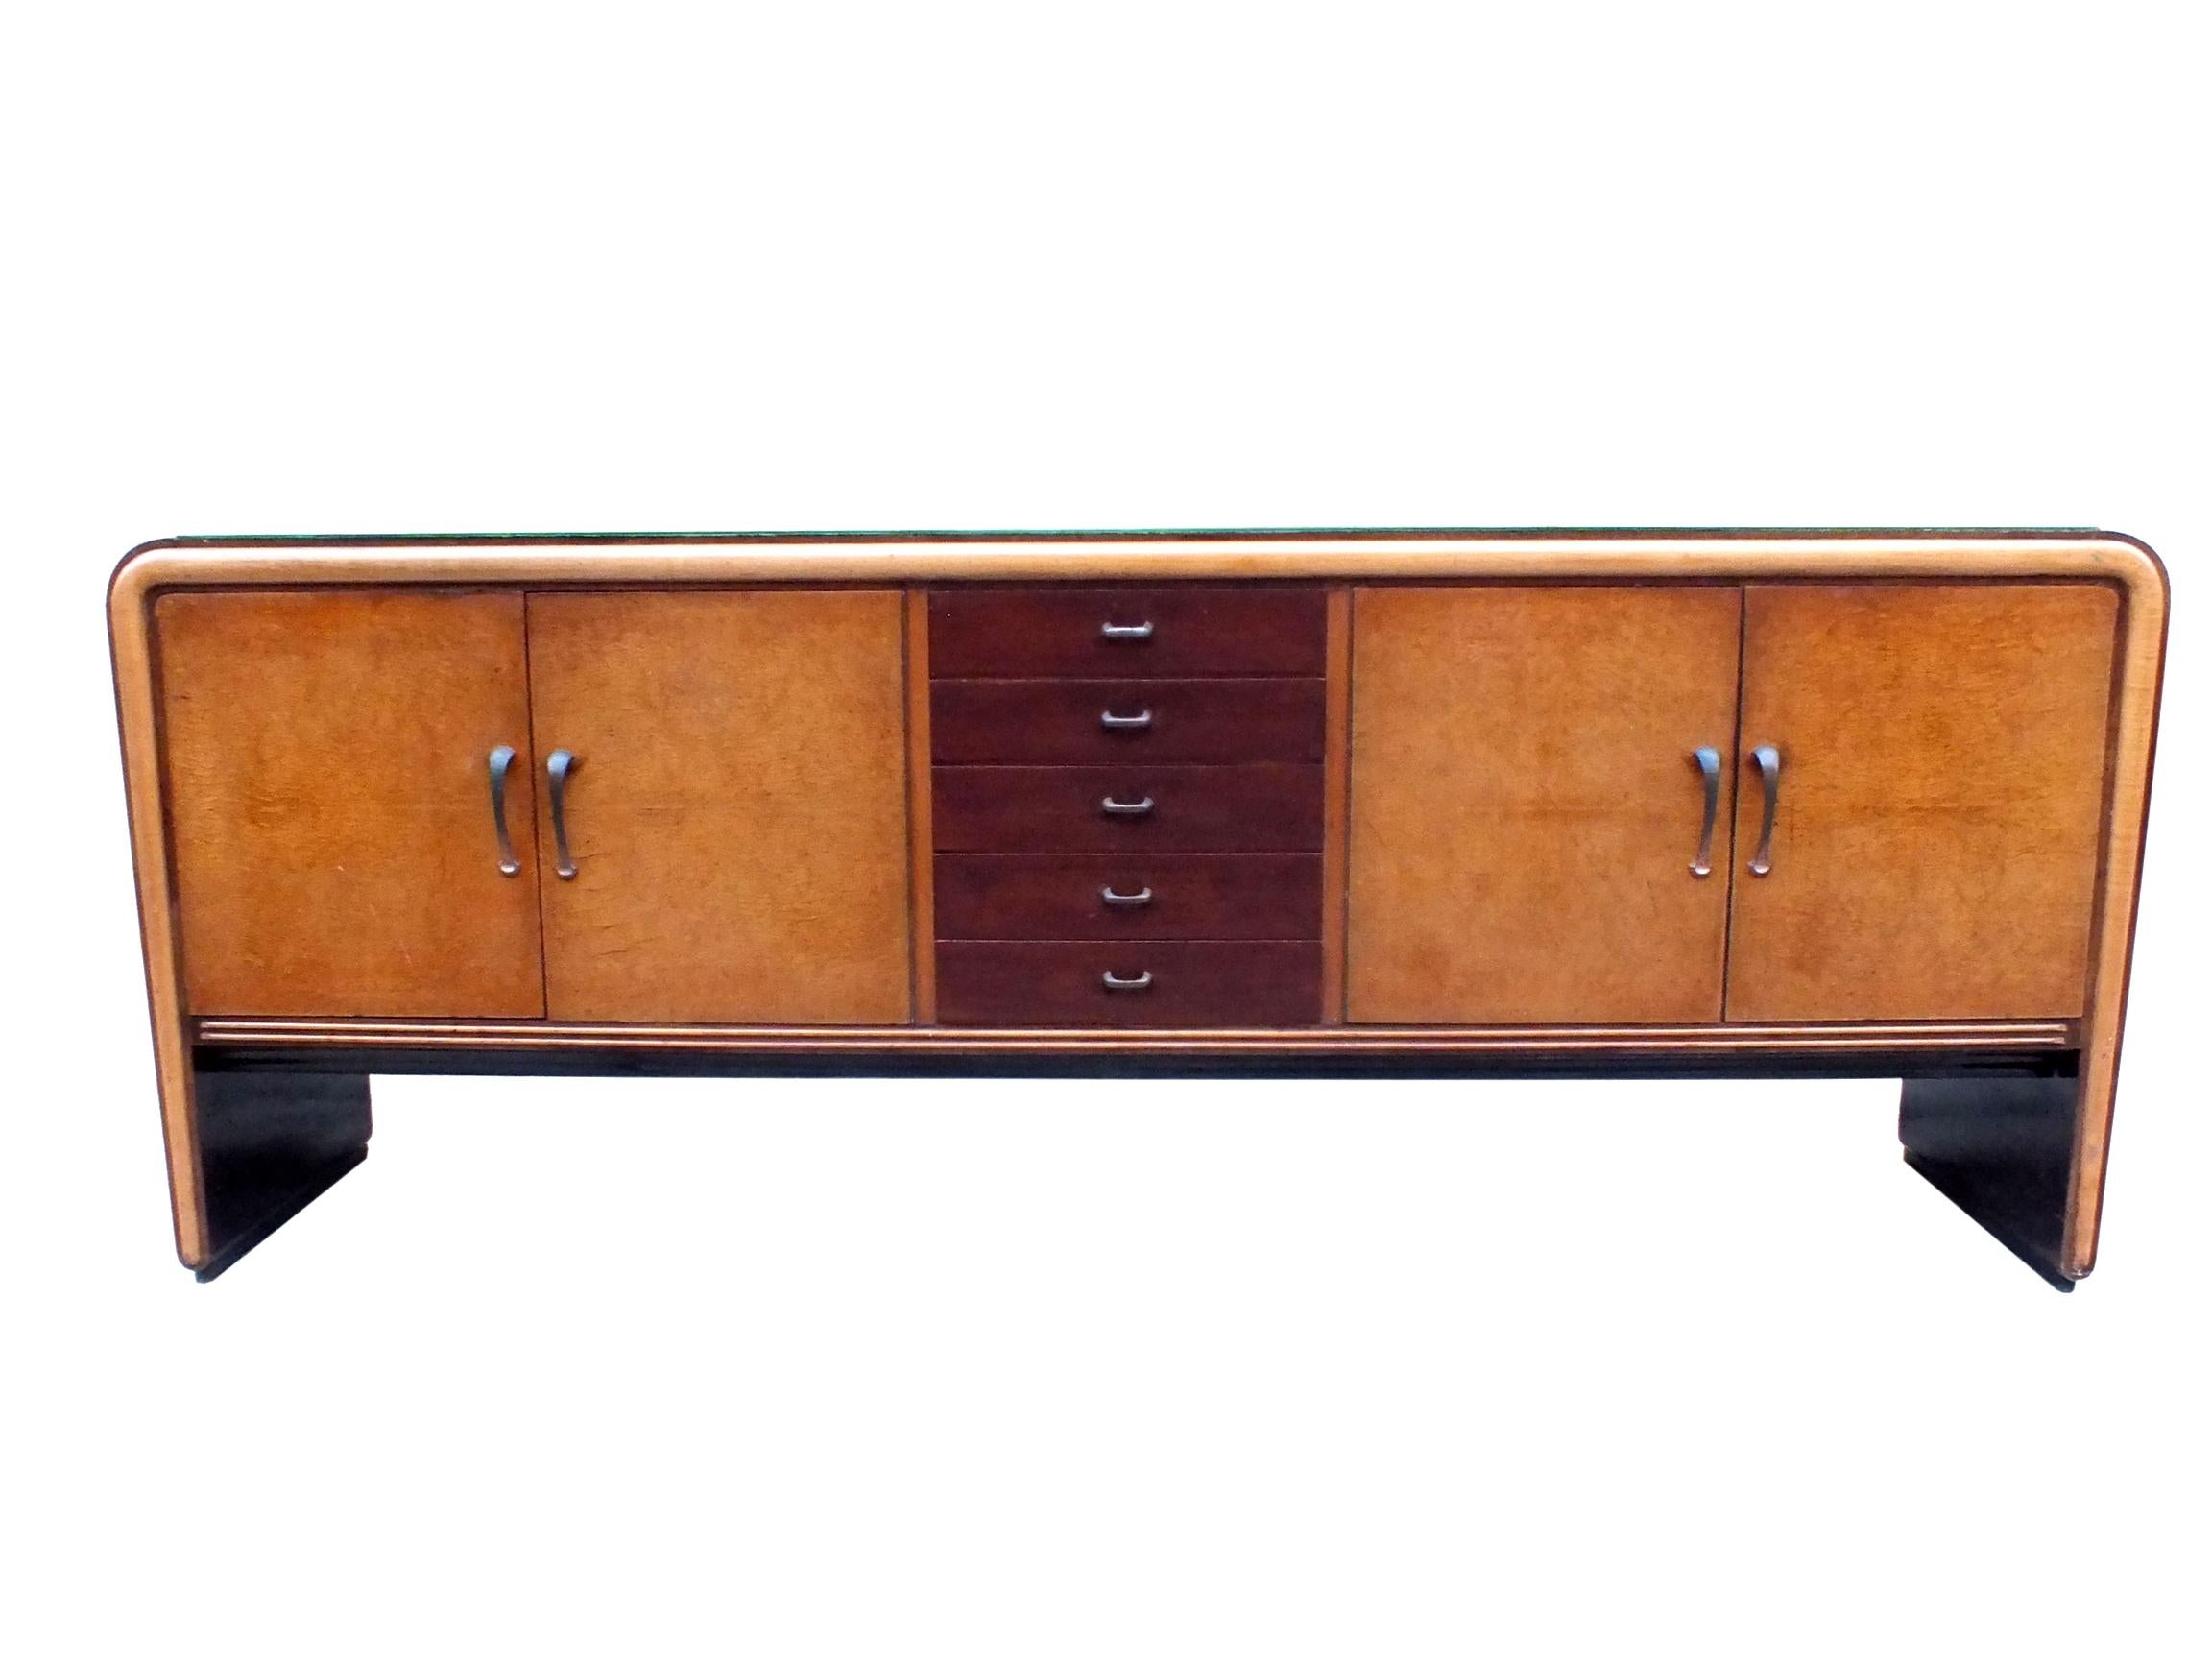 attributed to Borsani/Buffa important sideboard and cabinet bar design in years 1930 decò

Superior glass top.